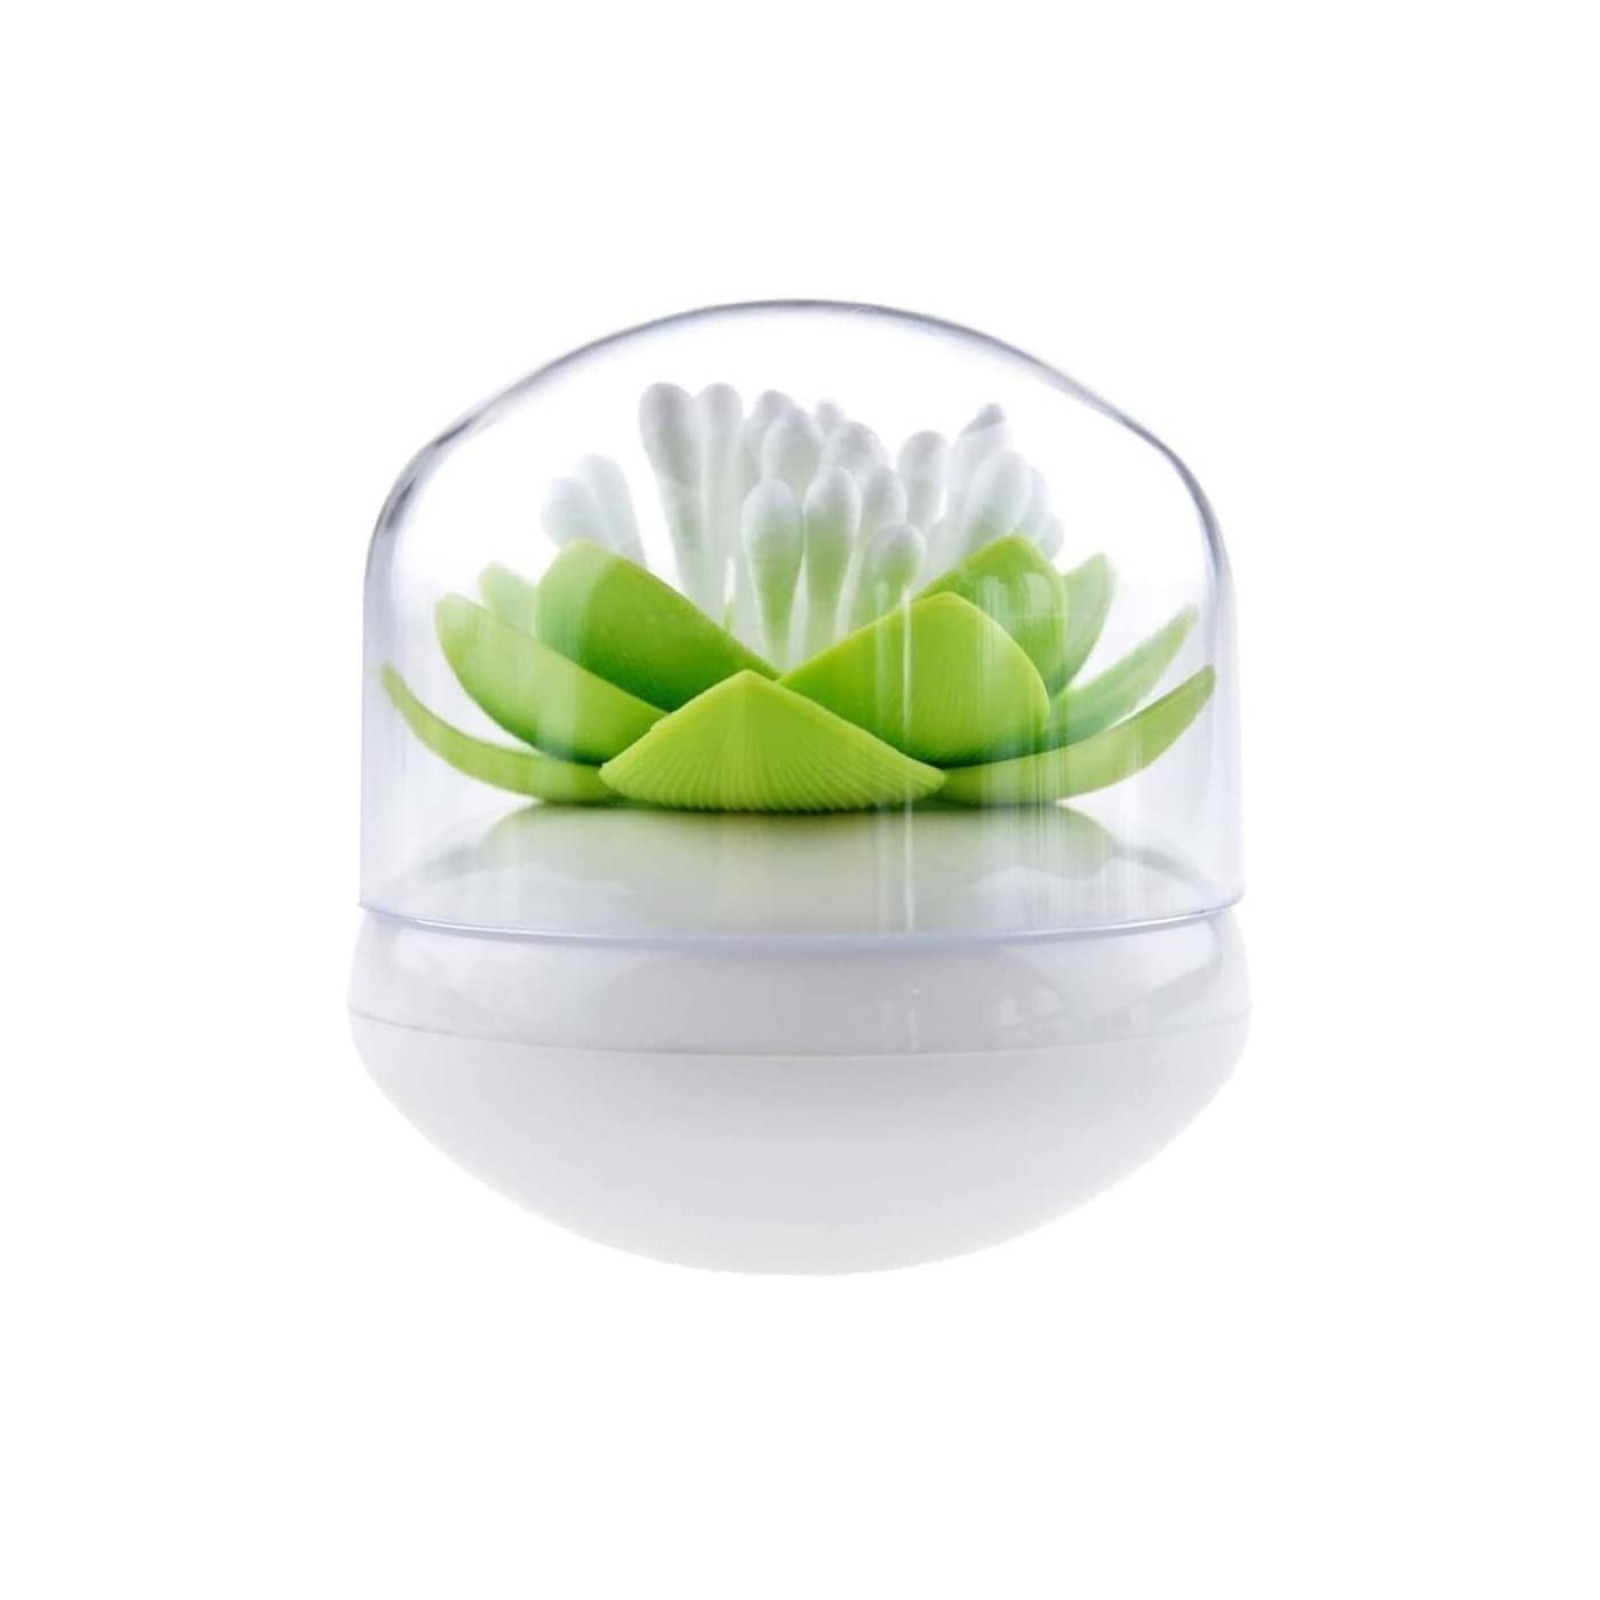 Qualy Lotus Cotton Bud / Toothpick Holder White / Green